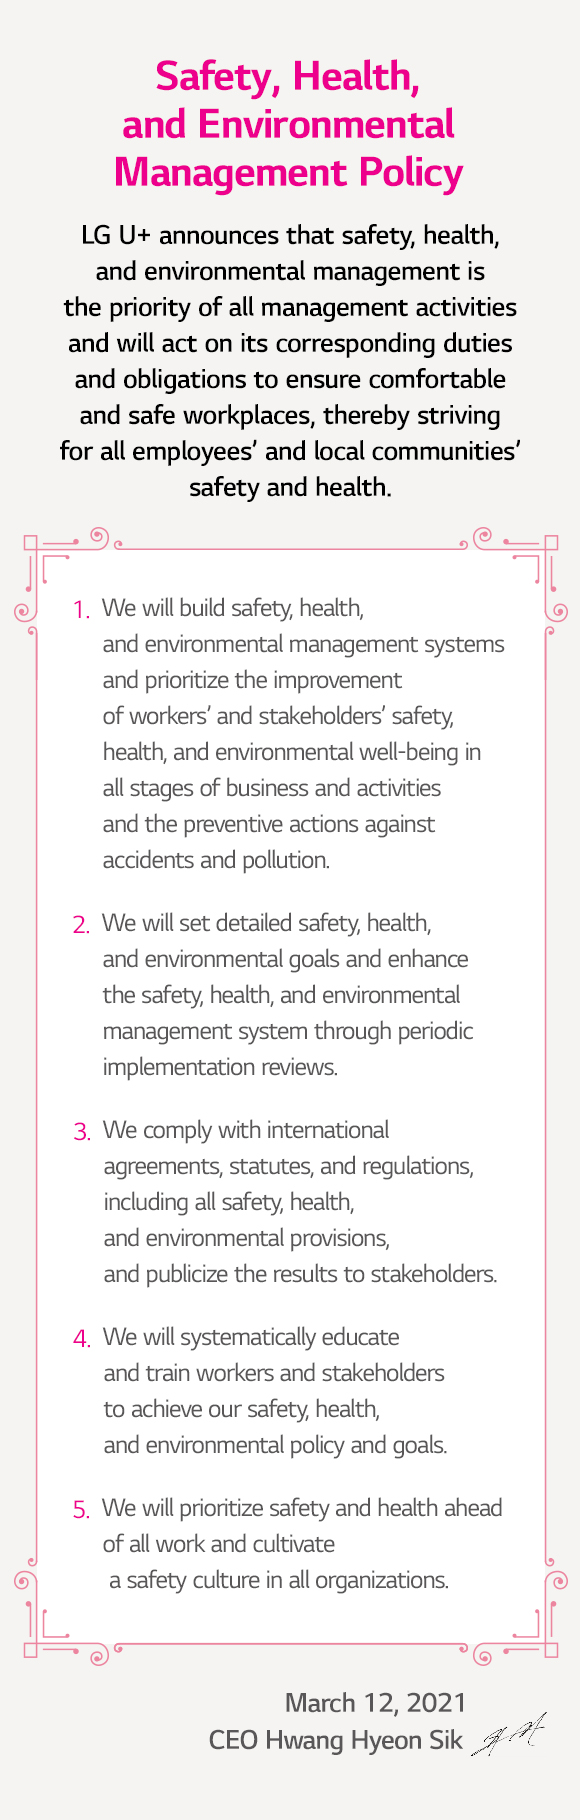 Safety, Health, and Environmental Management Policy